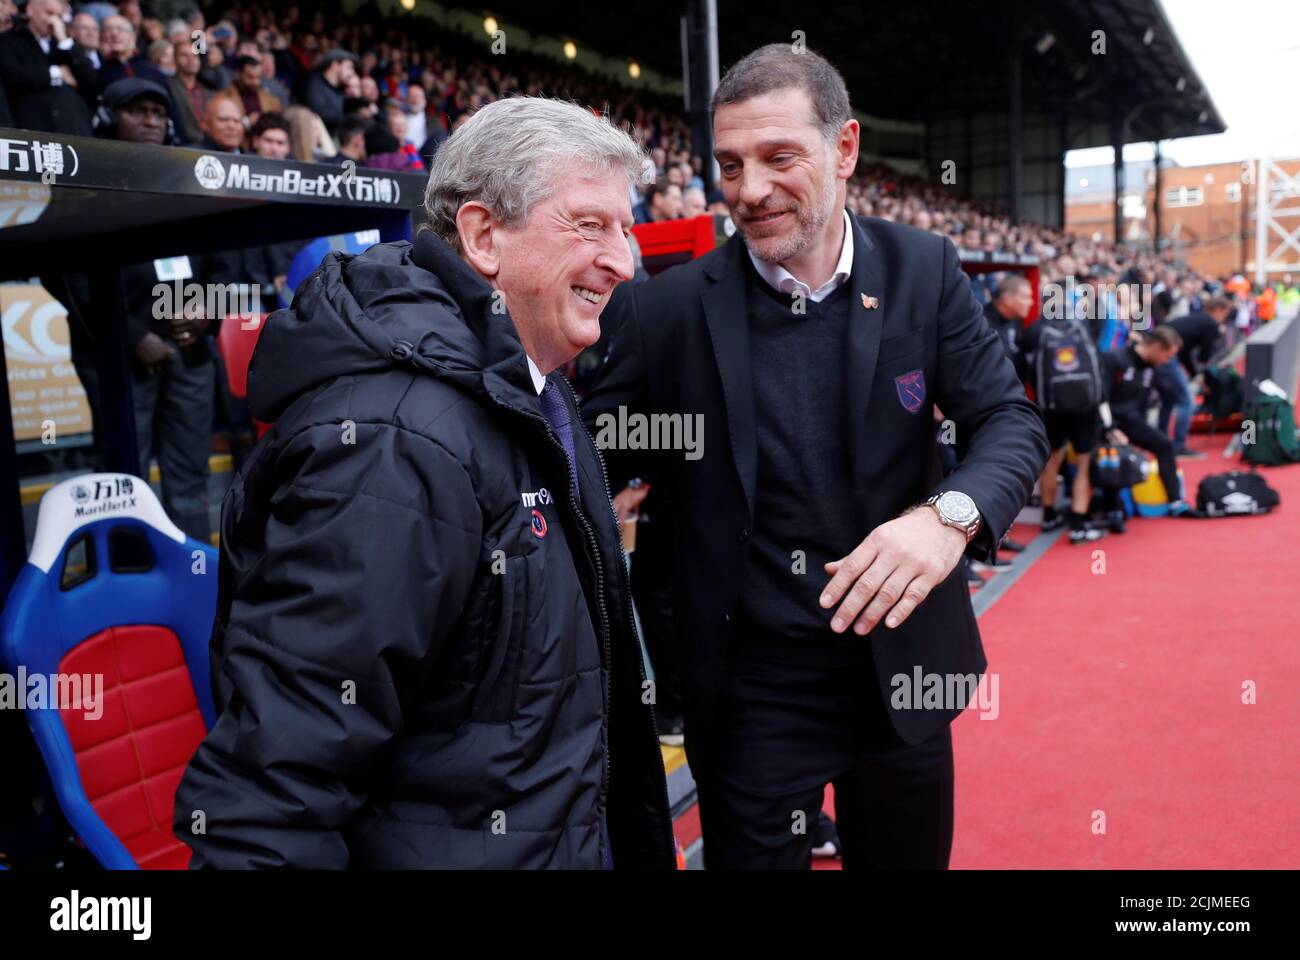 Soccer Football - Premier League - Crystal Palace vs West Ham United - Selhurst Park, London, Britain - October 28, 2017   Crystal Palace manager Roy Hodgson and West Ham United manager Slaven Bilic    REUTERS/Eddie Keogh    EDITORIAL USE ONLY. No use with unauthorized audio, video, data, fixture lists, club/league logos or 'live' services. Online in-match use limited to 75 images, no video emulation. No use in betting, games or single club/league/player publications. Please contact your account representative for further details.? Stock Photo